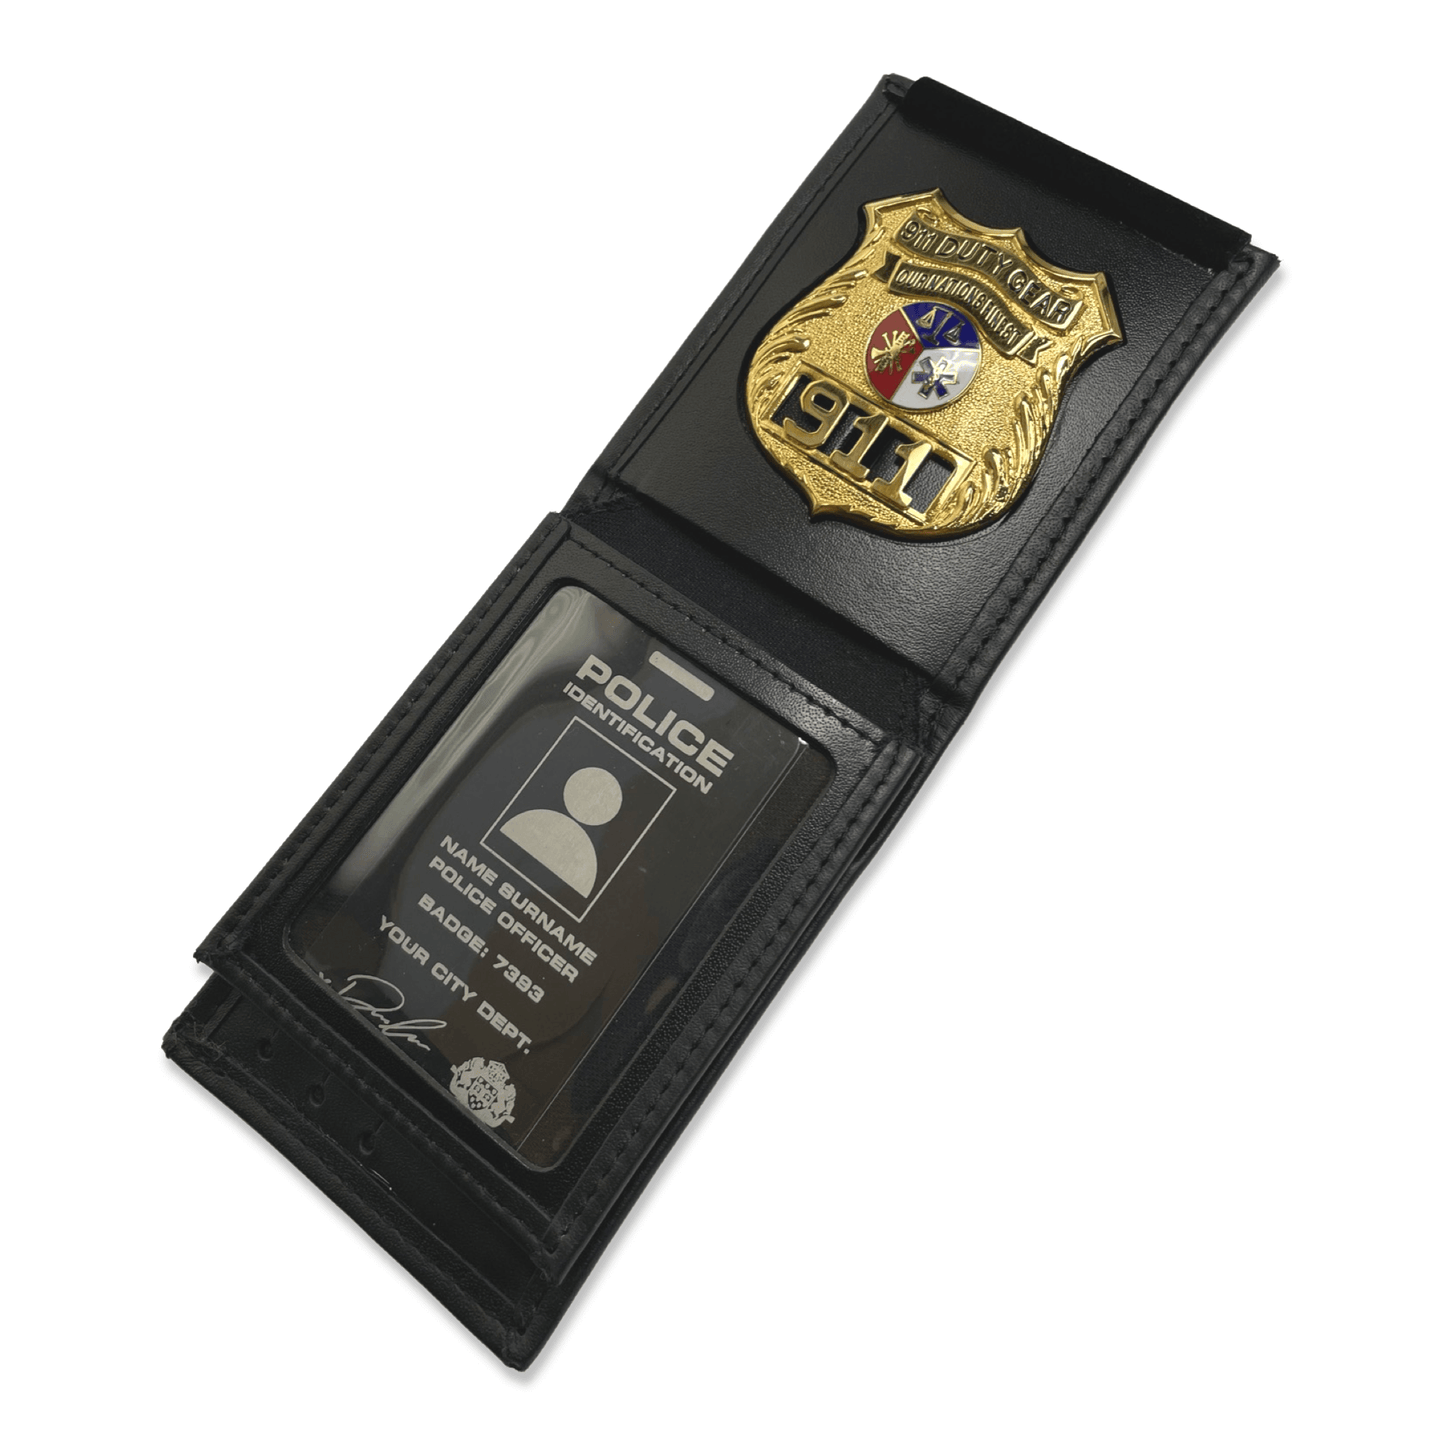 Respond Search and Rescue Hidden Badge Wallet